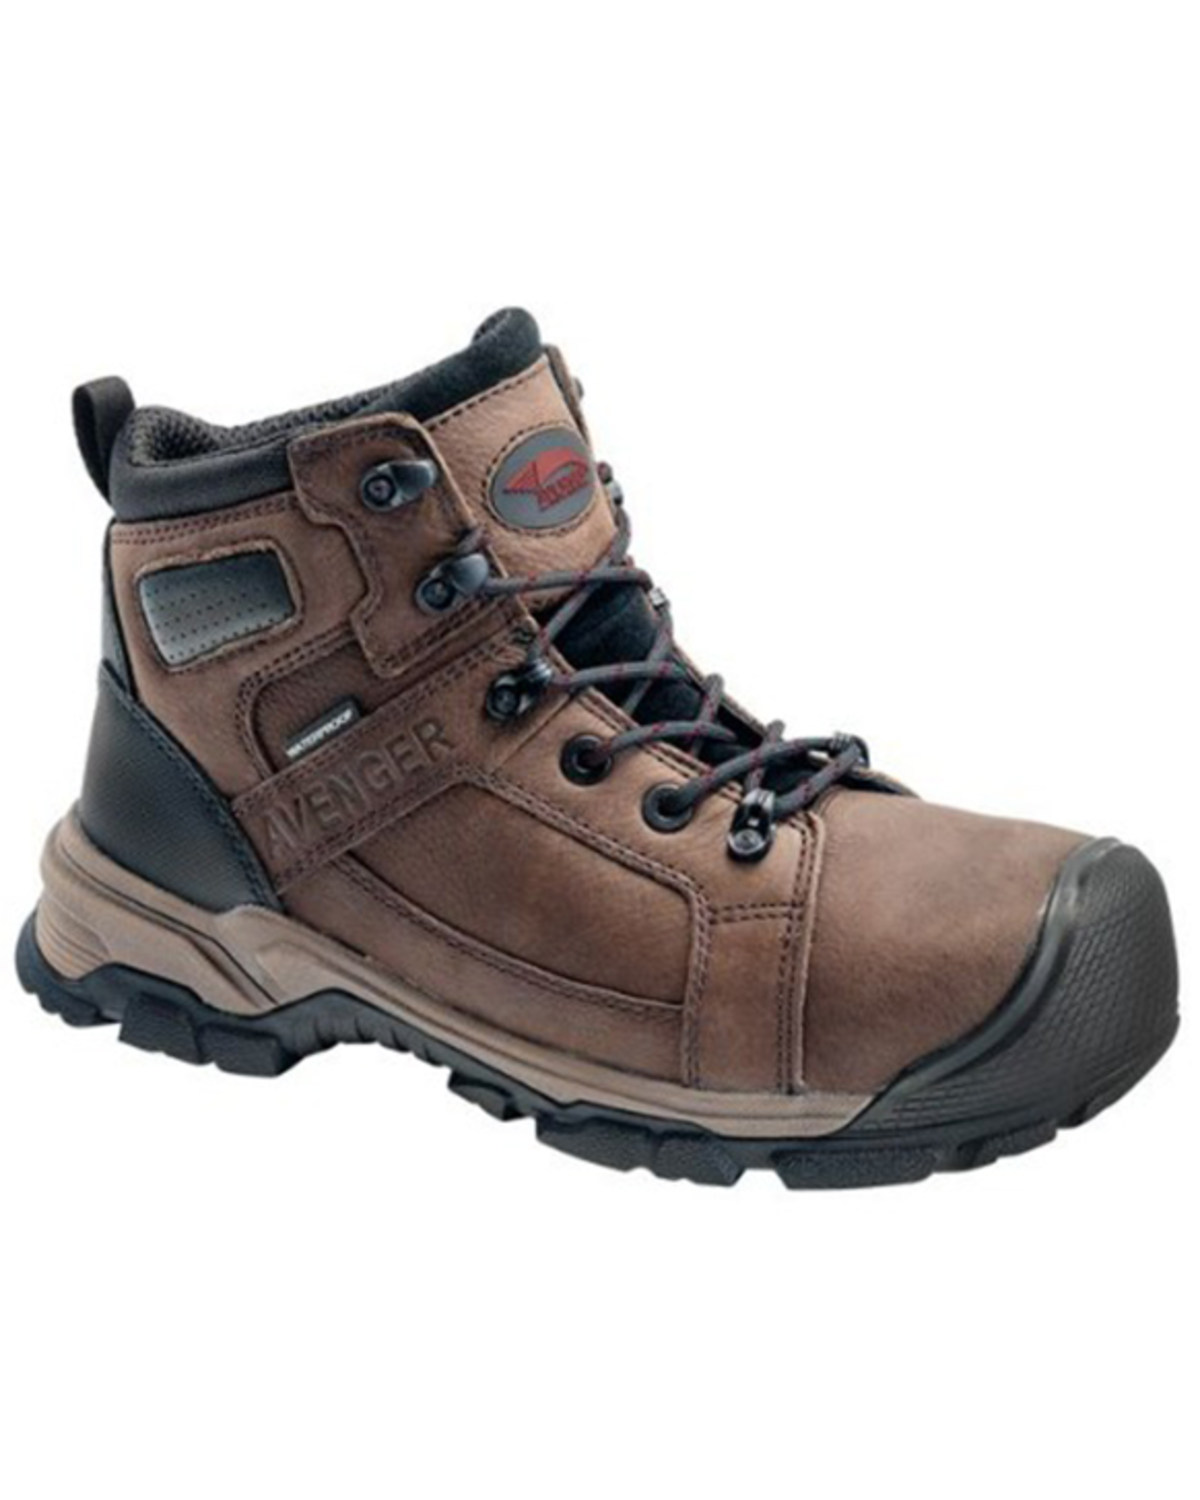 Avenger Men's Ripsaw Mid 6" Lace-Up Waterproof Work Boots - Alloy Toe